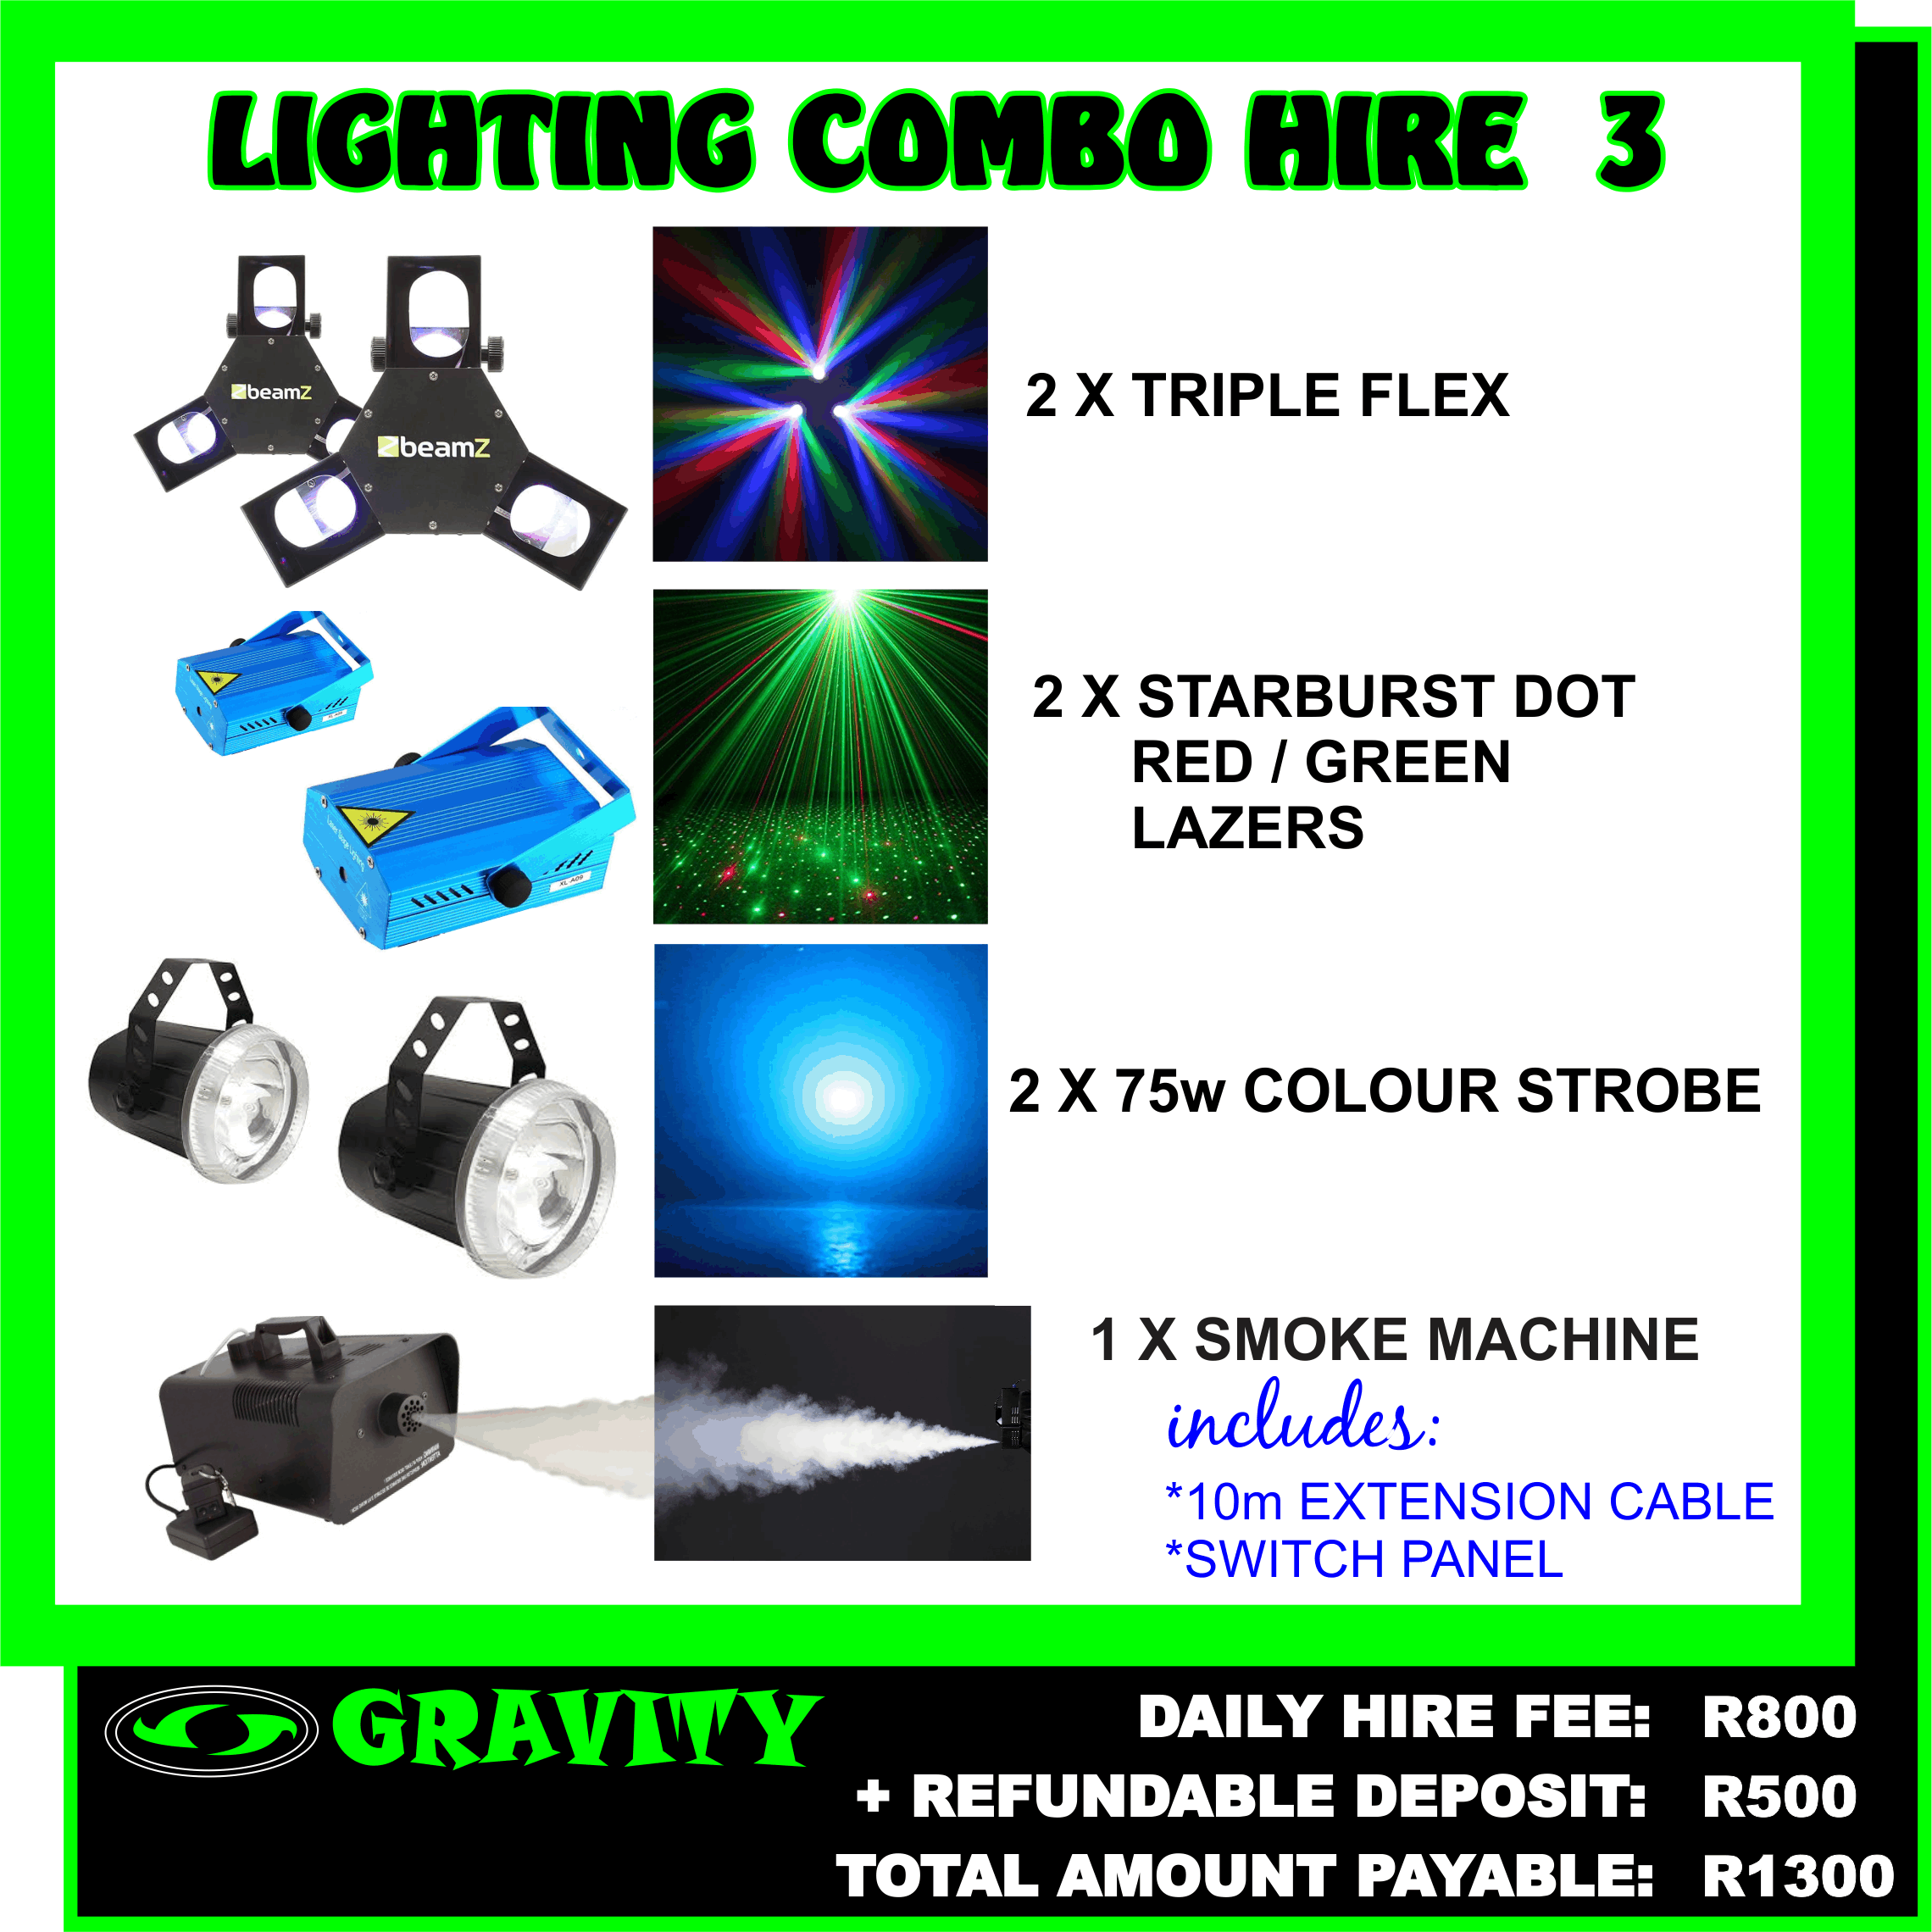 FOR THE ULTIMATE DISCO LIGHTS FOR HIRE FOR THAT SPECIAL EVENT OR PARTY THAT YOU GOING TO HAVE ...COME IN TO OUR STORE TO HIRE A LIGHTING PACKAGE FOR YOUR NEXT OCCASION OR FOR YOUR NEXT PARTY.  YOU CAN HIRE OUT OUR LIGHTING PACKAGES FOR A DAILY HIRE RATE EXCLUSIVELY FROM GRAVITY SOUND AUDIO DJ STORE 0315072463.   Full Color Wash Uplighting - Portland Wedding Lights www.portlandweddinglights.com/color-wash-uplighting.html Transform your Portland, Oregon wedding ballroom into a wondrous, romantic space with our full room wall wash uplighting. Our event lighting service, Portland ... Lighting Hire | Party Hire Group www.partyhiregroup.com.au/lighting-hire/ Make your party spectacular with party lighting hire Sydney! Complete with ... The par can is a great light for creating a colour wash and ambience at your event. Light up the stage with 4 basic principles - Creative & Cultural Skills https://ccskills.org.uk › Creative Choices › Careers Advice › Industry insights Jun 19, 2014 - Overview: Think atmospheric with coloured lighting. ... band are more likely to require a bold colour wash that conveys their personality. PR LIGHTING LTD. www.pr-lighting.com/ Ricardo Ortiz Showcases Pepe Aguilar, with PR Lighting Wash and Beams. Born into a showbiz family, Pepe Aguilar has been performing from an early age and ... Digital Axis Mobile Entertainment - Color Wash Lighting damdj.com/services/color-wash-lighting/ Digital Axis can transform your event and make it sensational with lighting. We are proud to offer Color Wash Lighting options to enhance the look and feel of ... Beamz FlatPar Disco DJ LED Colour Wash Party Lighting +: Amazon ... https://www.amazon.co.uk/Beamz-FlatPar-Colour-Lighting-Machine/.../B00MALRBA... Beamz FlatPar Disco DJ LED Colour Wash Party Lighting +: Amazon.co.uk: Electronics. color wash Archives - Intelligent Lighting Design - Weddings ... www.ildlighting.com/tag/color-wash/ Guests were greeted by pattern projection lighting, rosa teardrop chandeliers, color wash walls, and our custom “Gatsby” chandelier draped in feather and ... LED Uplighters & Washlights | - Party Equipment For Hire www.hireforparties.co.uk/lighting-equipment/led-uplighters-washlights/ Uplighters are used to wash an entire wall, ceiling or floor with colour, and until ... Many people consider LED up lighters to be ideal form of Mood lighting. In fact ... Ad Home Lighting - Get it at Loot Online & Save? Adwww.loot.co.za/Kitchen_&_Home? Buy Home Lighting at Loot.co.za & Get Free Delivery on R250+*. Shop Now! Legendary Service · Over 14 Million Products · MySchool Fundraiser · Spend Discovery Miles   Contact Us  Contact Us: CEO Mr RAJEN RAMBOOKAN  Tel no: 0315072736 Mobile no: 0787604740 Email: info@gravityaudio.co.za  For more information, please fill in our contact us form.   WhatsApp Now  Link Total: NA Total Items: 0 Shopping Cart